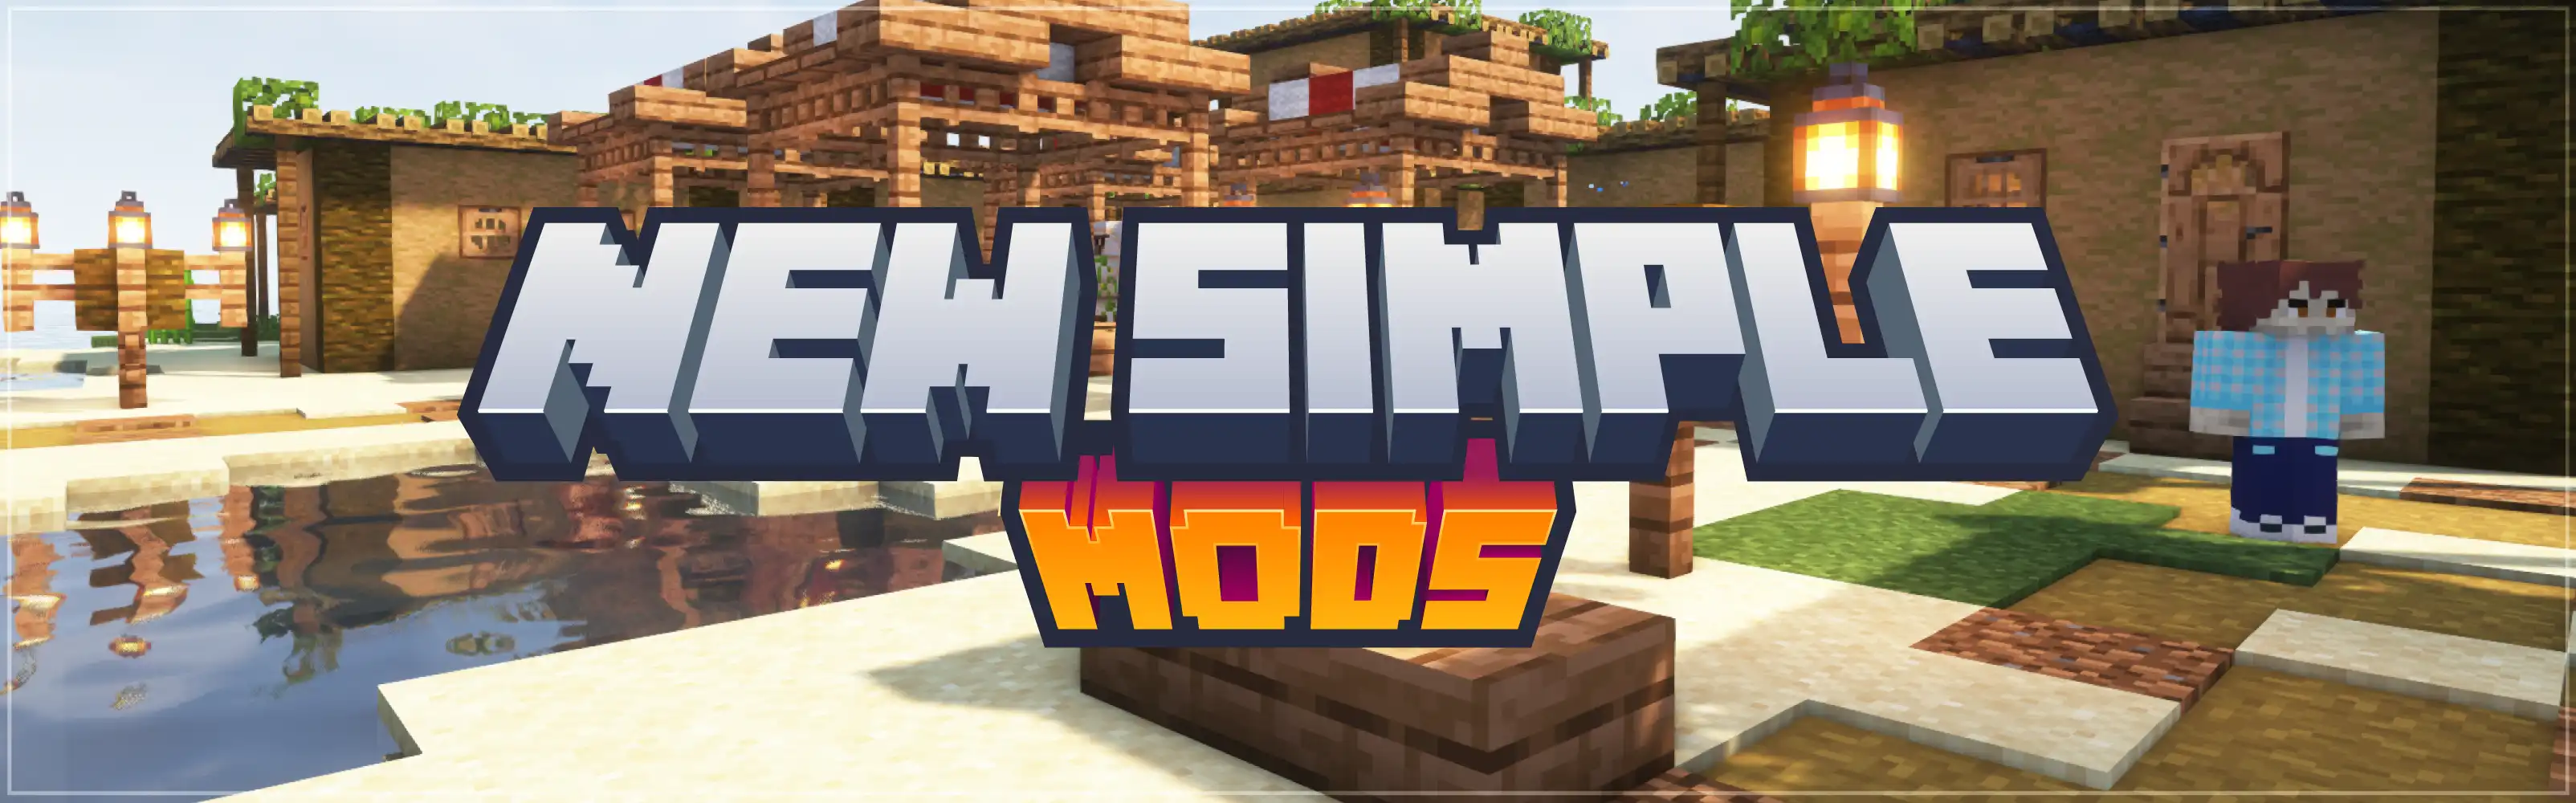 New Simple Mods - Easy to Understand  1.20.4 UPDATE! - Minecraft Modpacks  - CurseForge